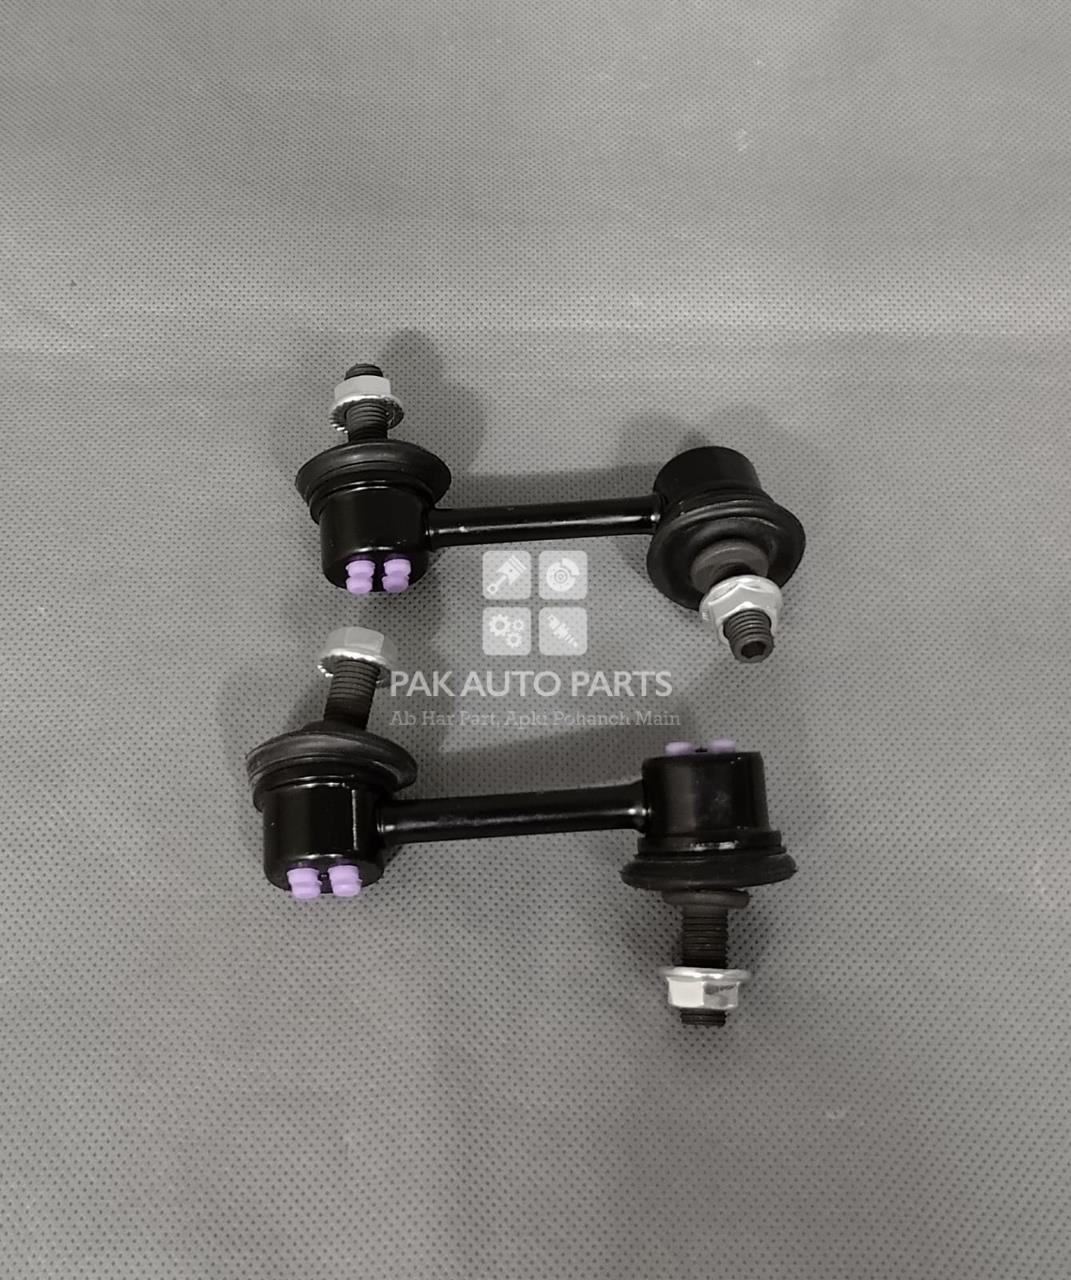 Picture of Honda Accord CL7 Z Link Stabilizer Set